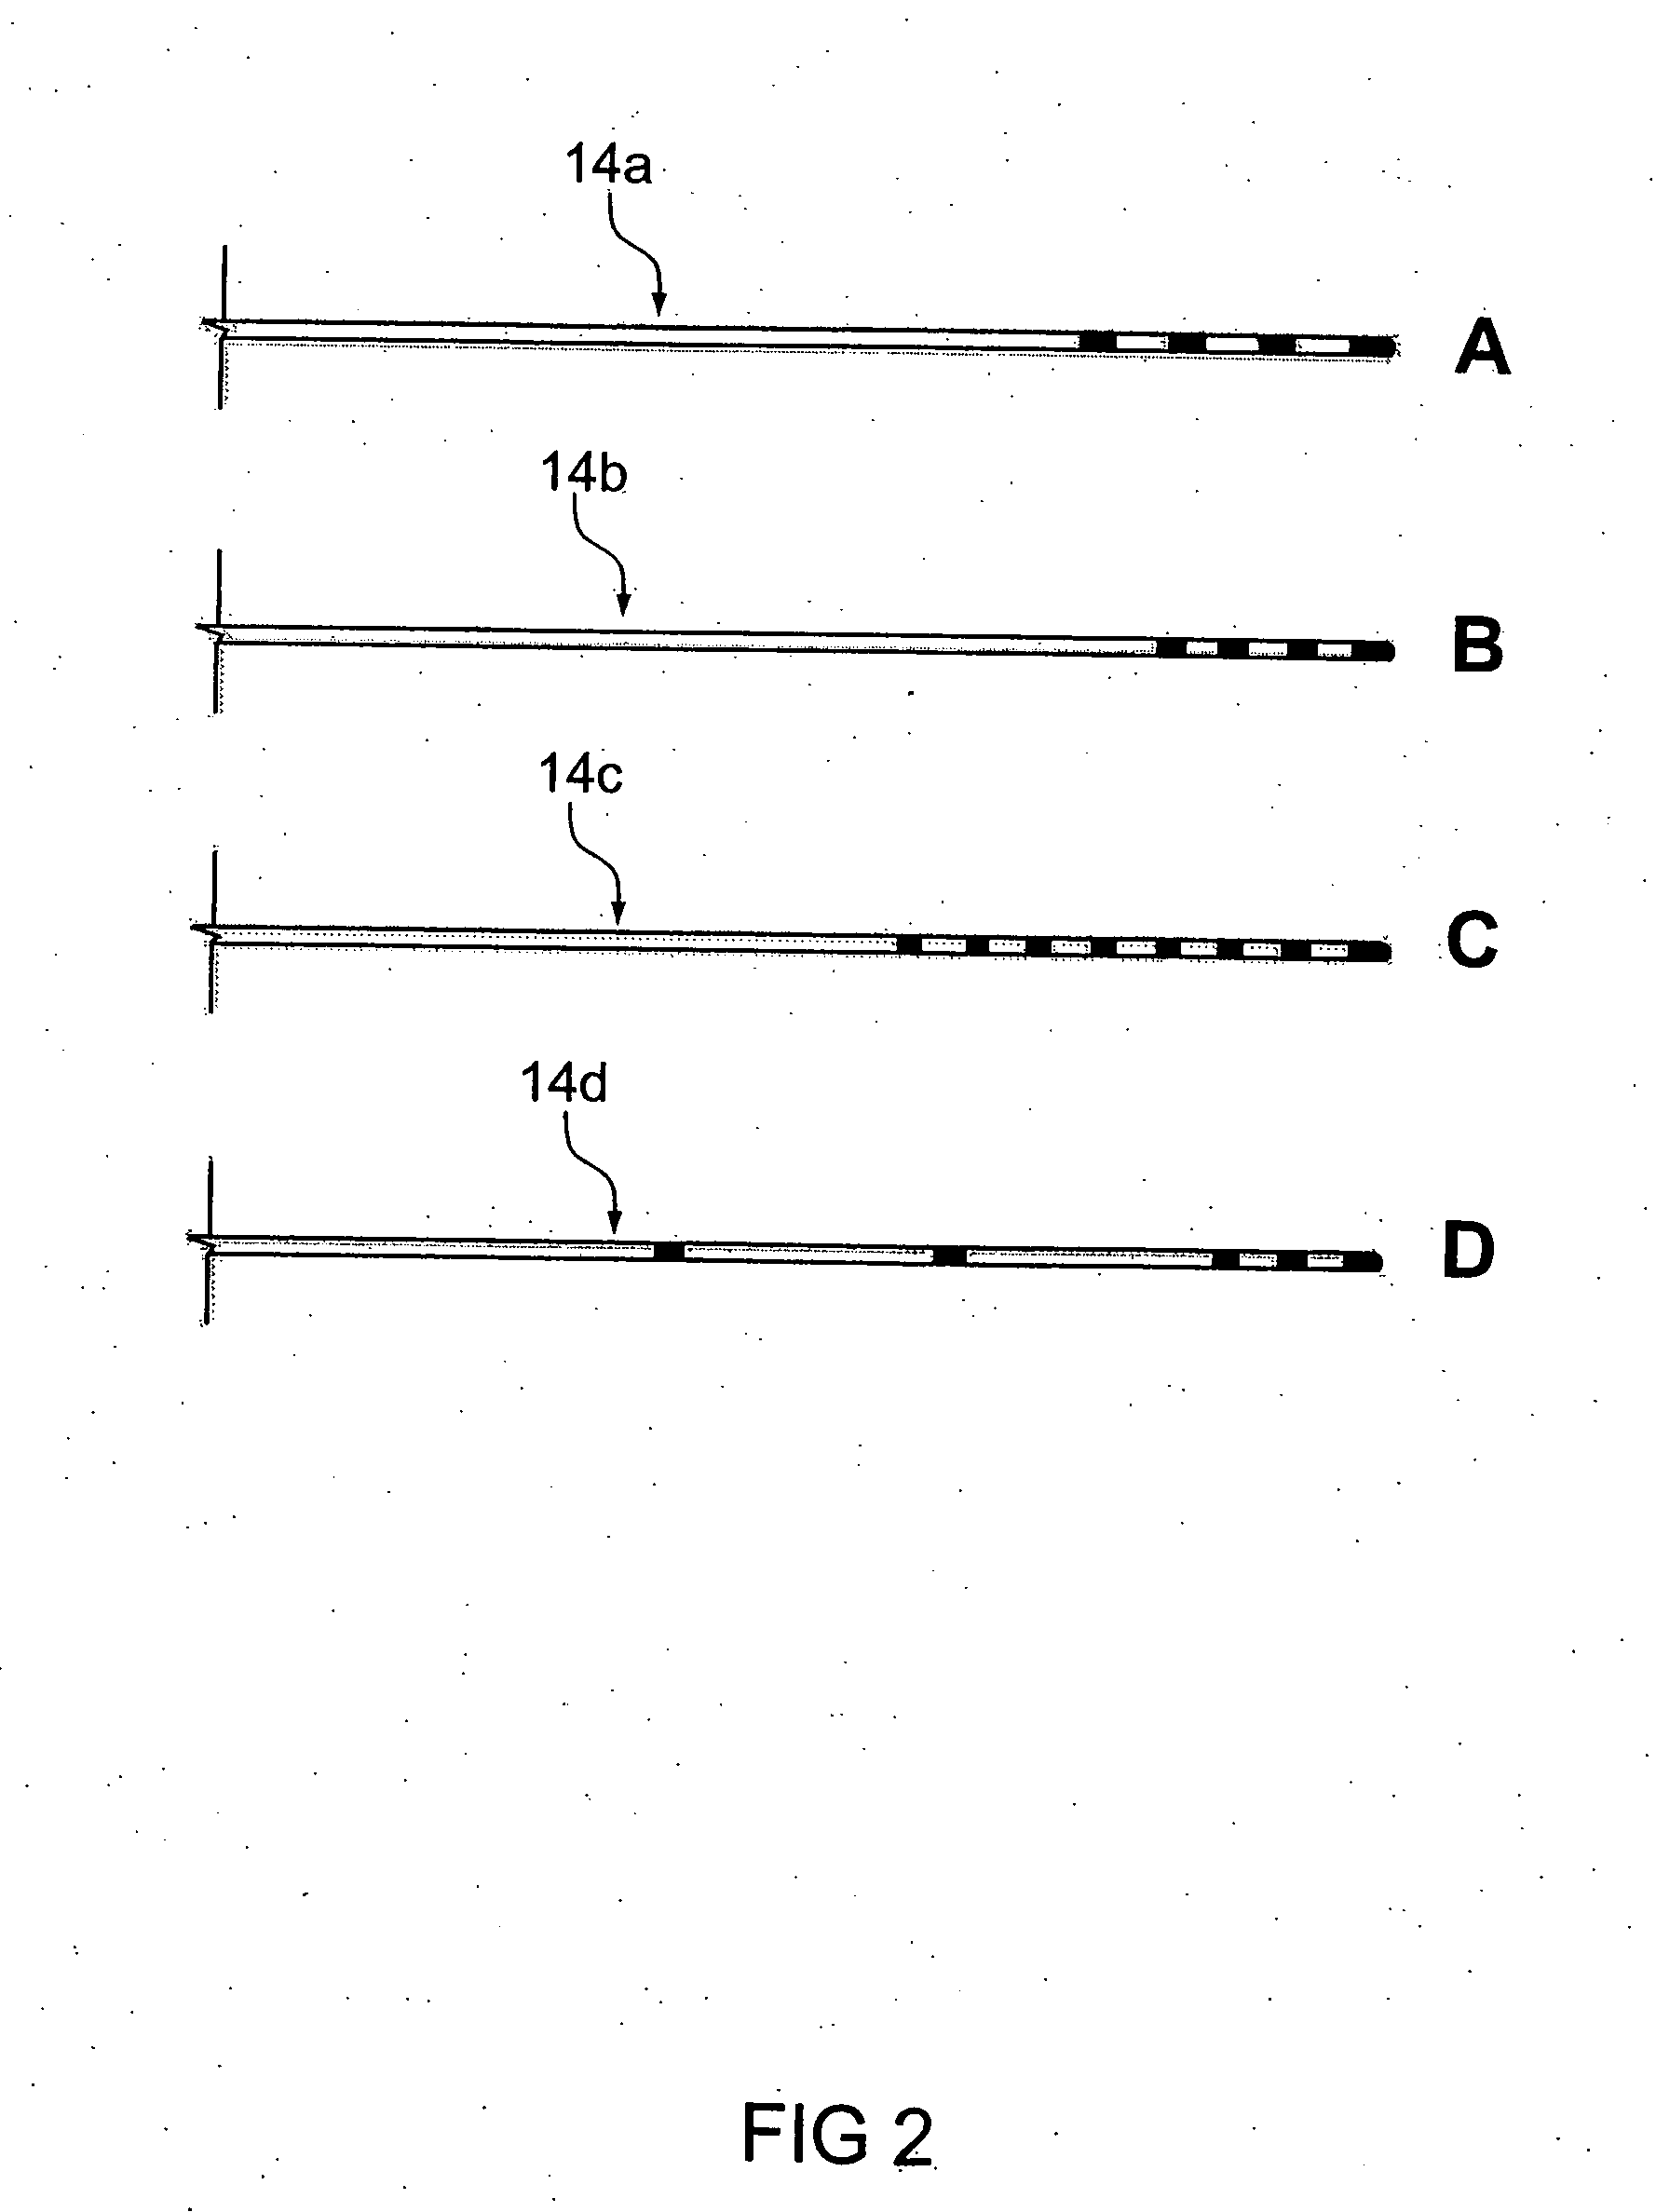 Method of treating cognitive disorders using neuromodulation